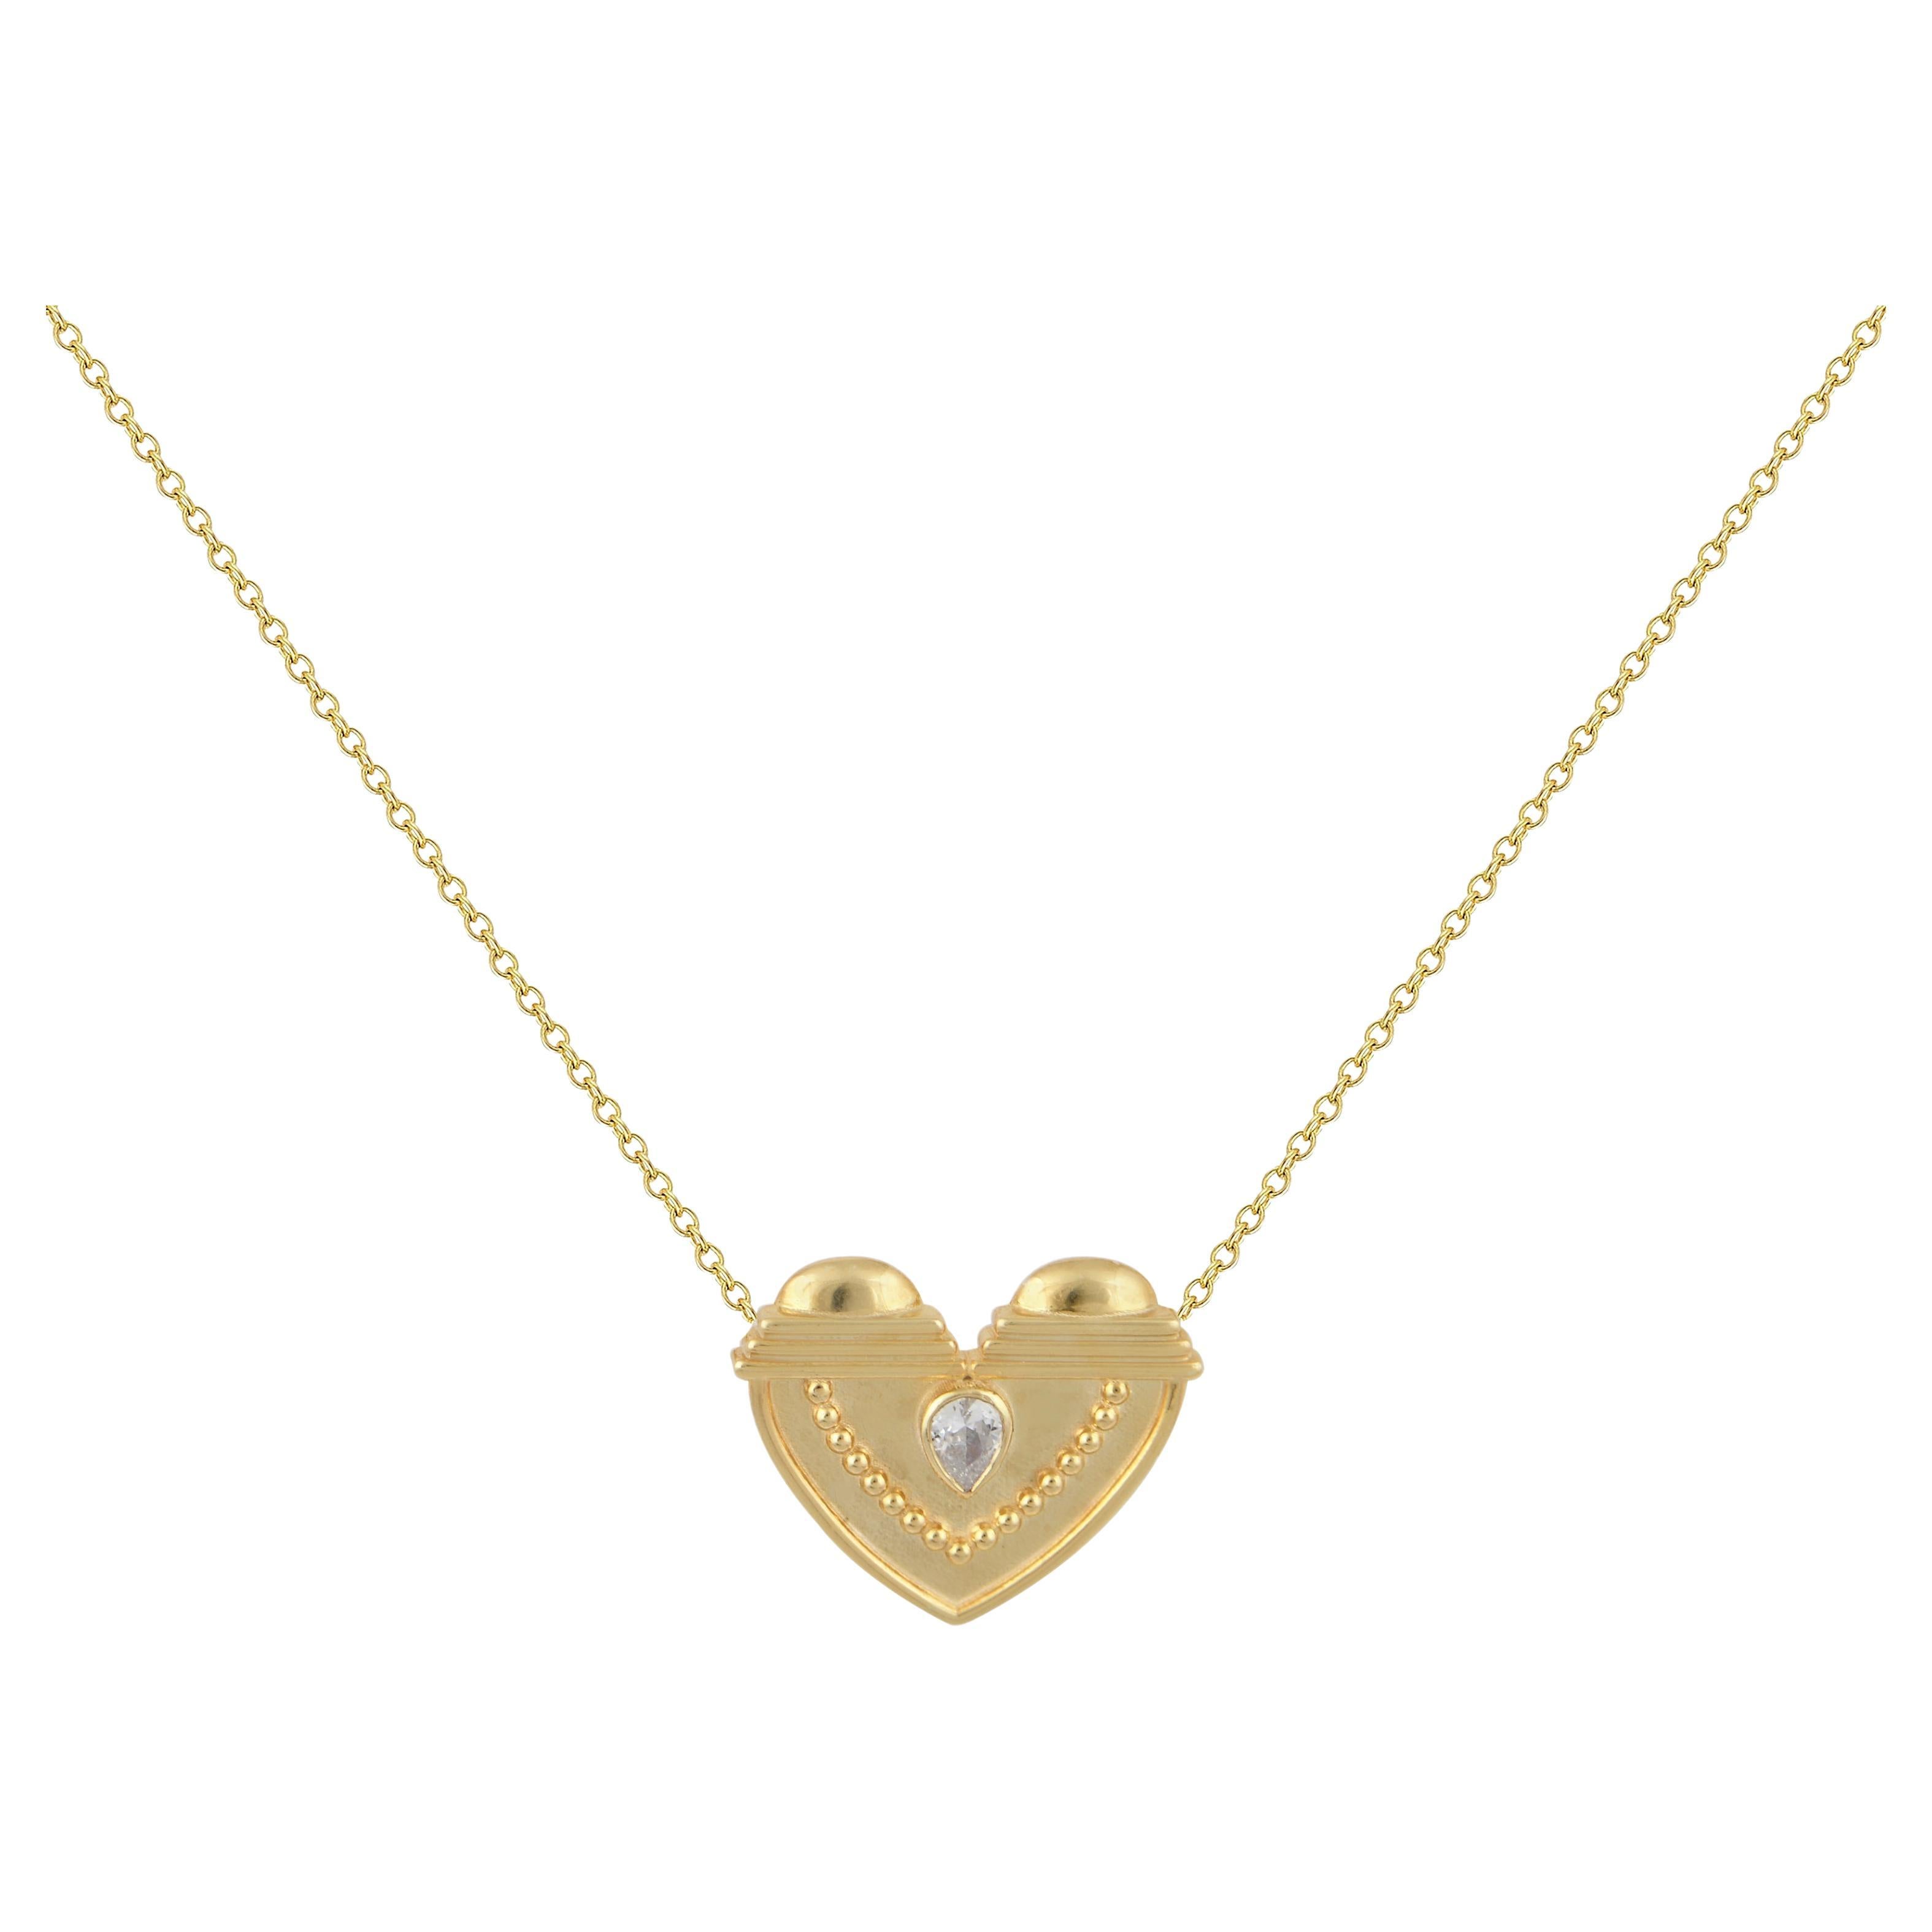 Textured Heart Pendant in 18 Karat Gold With A Pear-Shaped Diamond For Sale